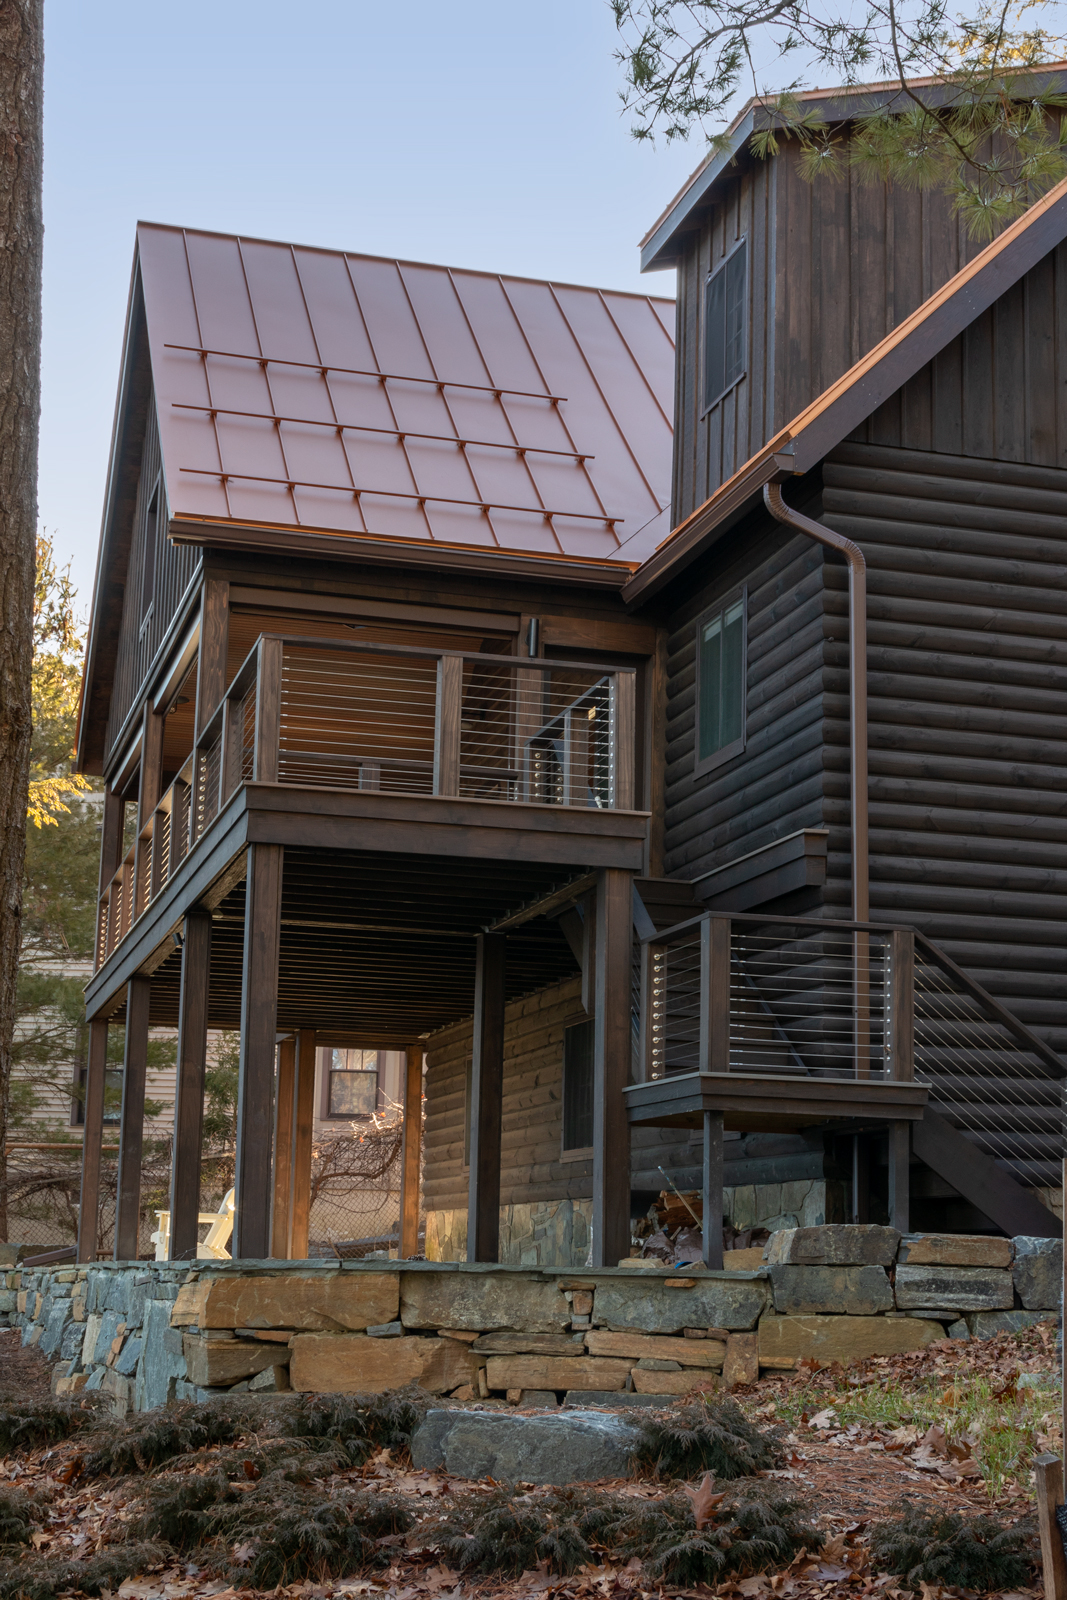 The attention to the details of the deck addition was paramount to success. The material selection for the design focused on harmonizing the colors and form of the existing cabin while selecting wood siding that blended with the natural surroundings of the shore. 